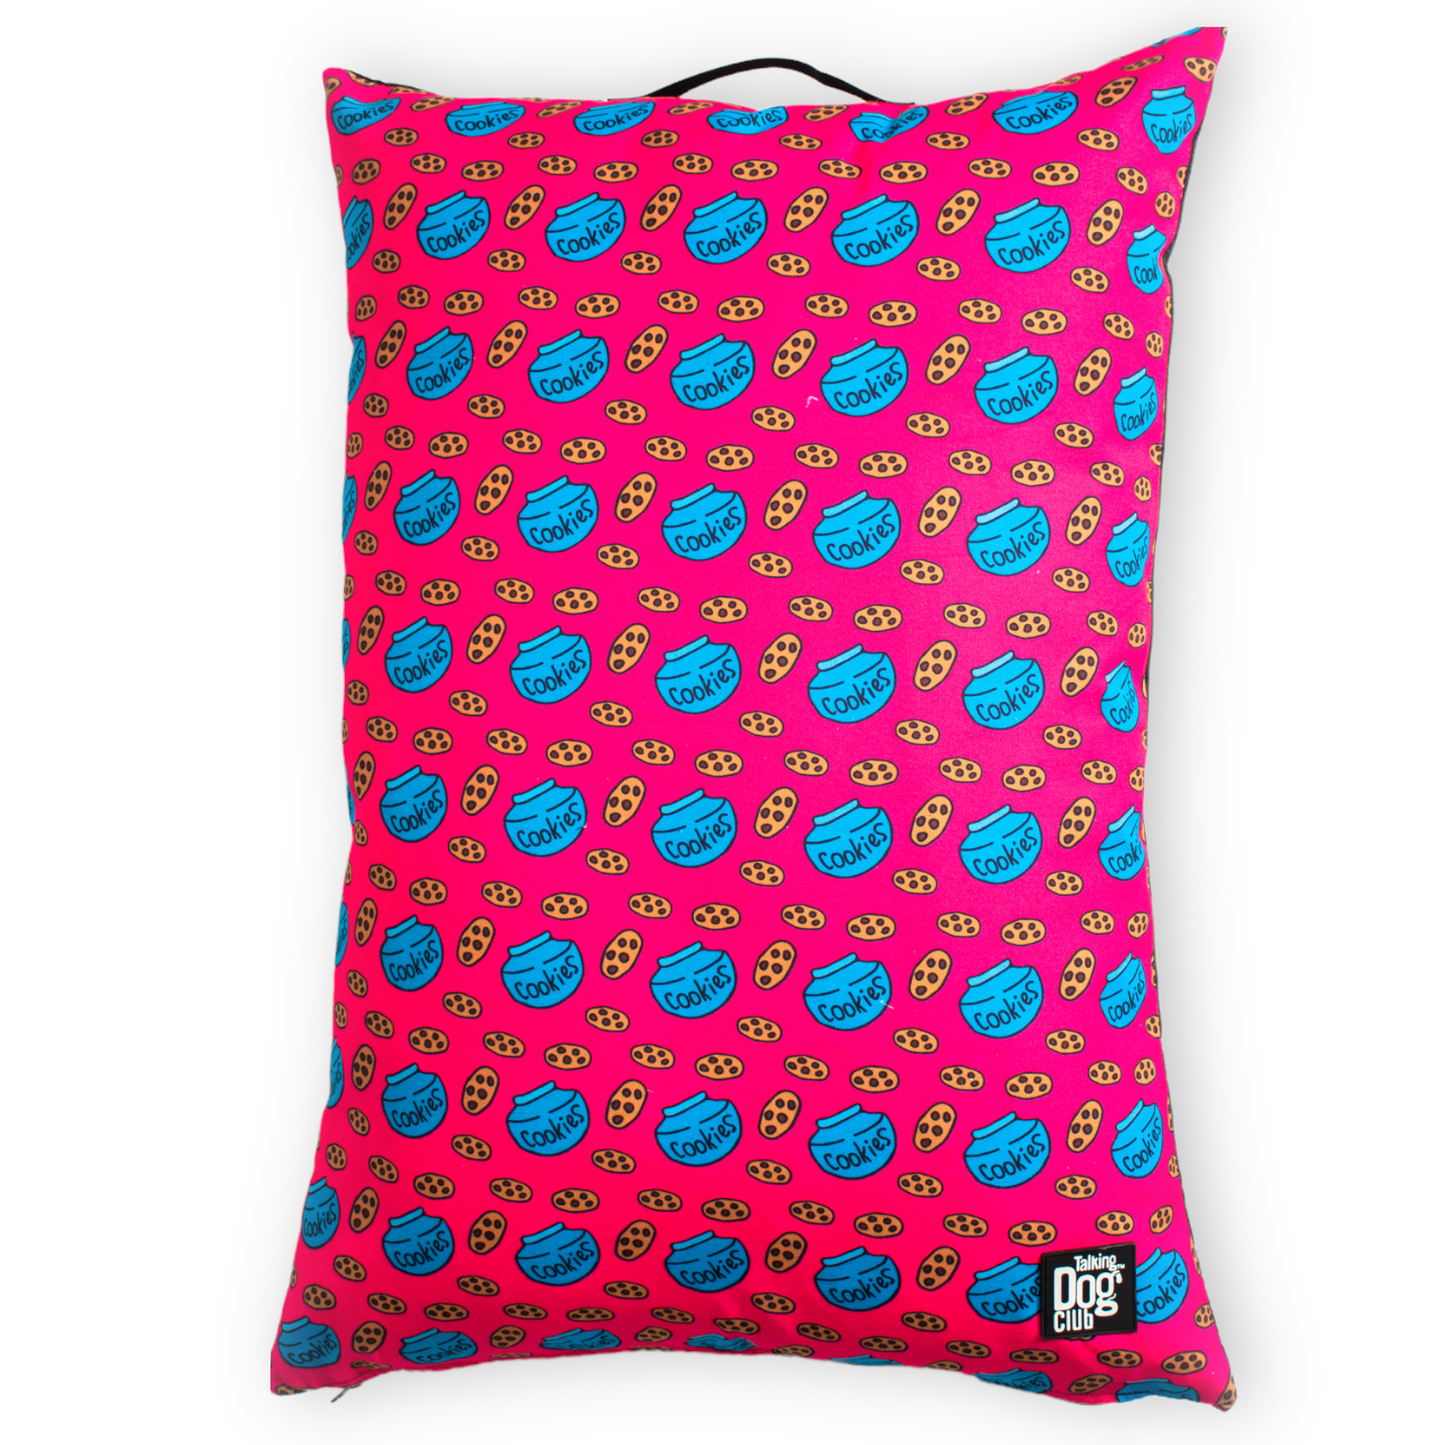 Cookie Dreams Pillow Bed